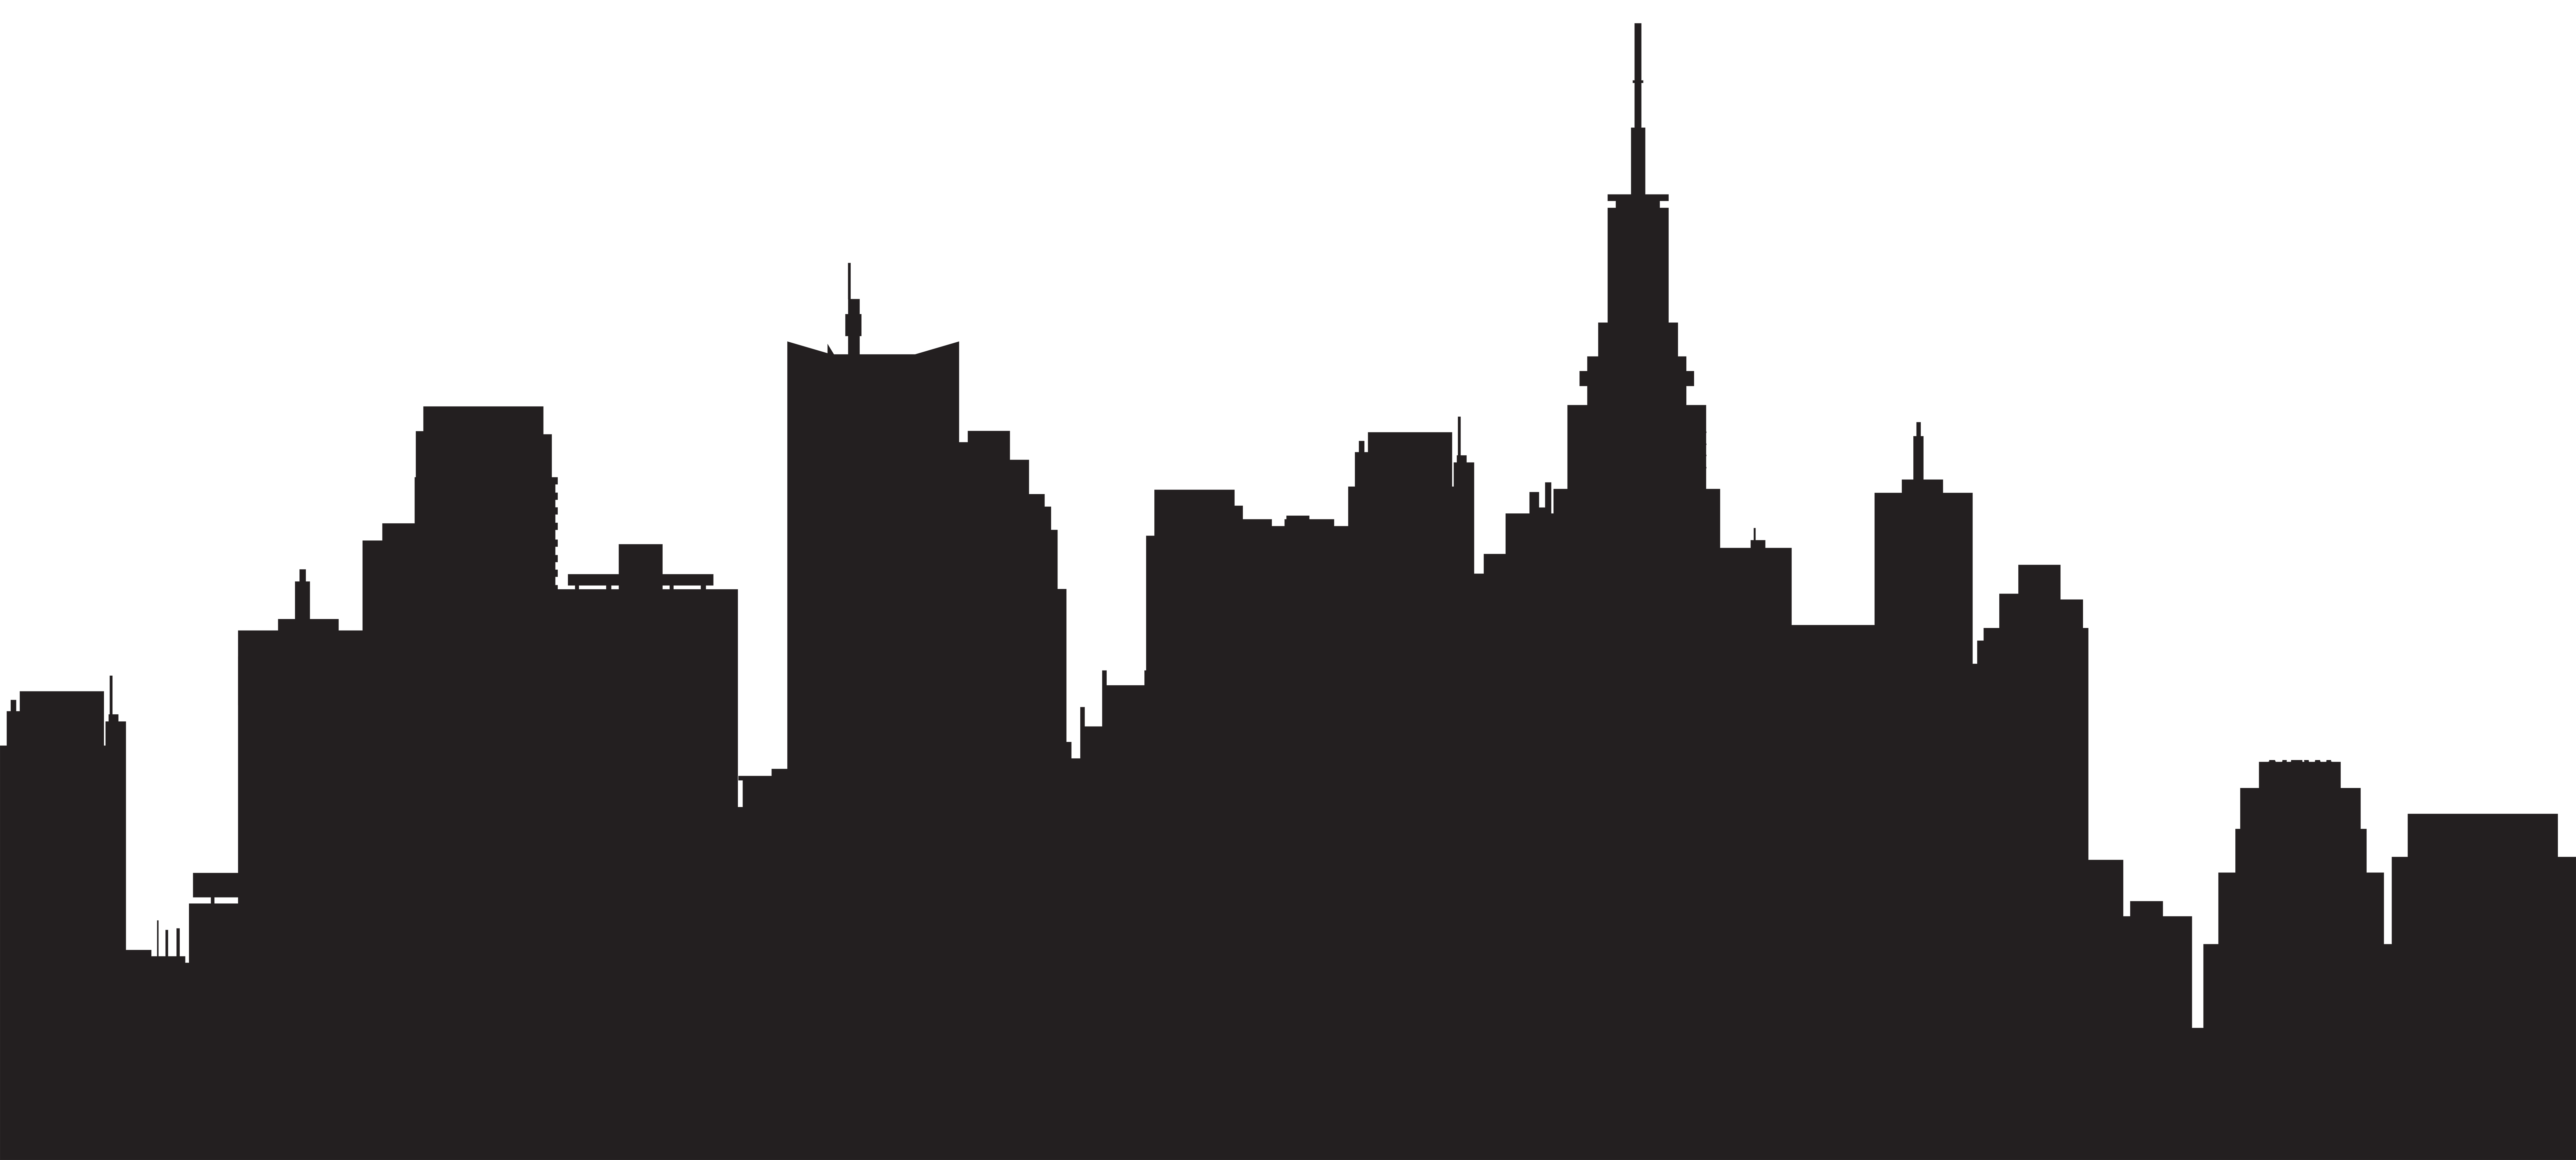 New York City Silhouette PNG Image File